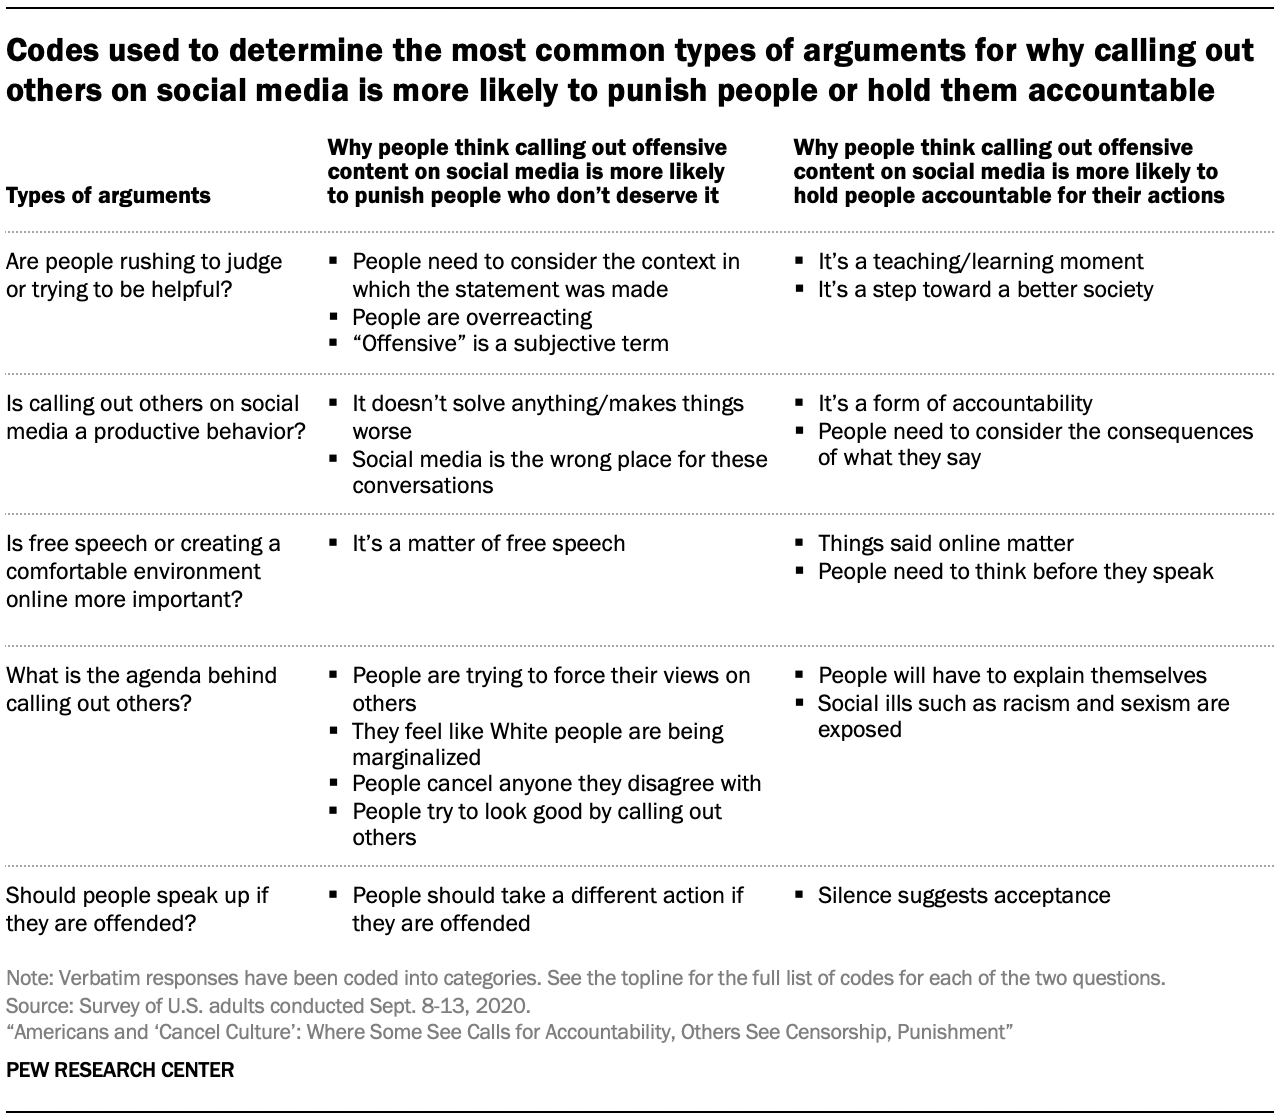 Codes used to determine the most common types of arguments for why calling out others on social media is more likely to punish people or hold them accountable